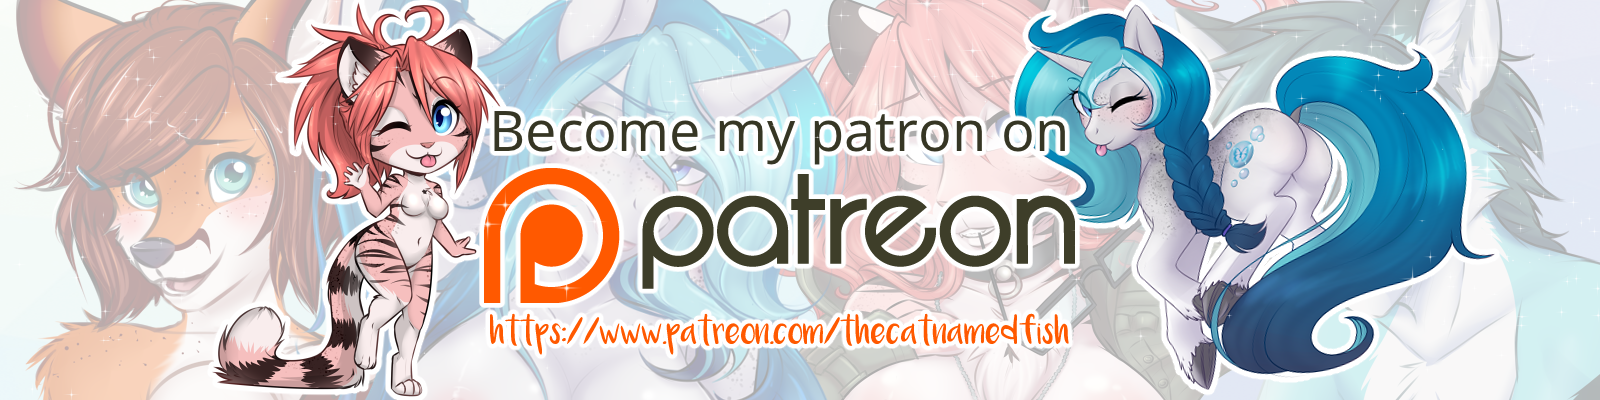 Please Support Me on Patreon